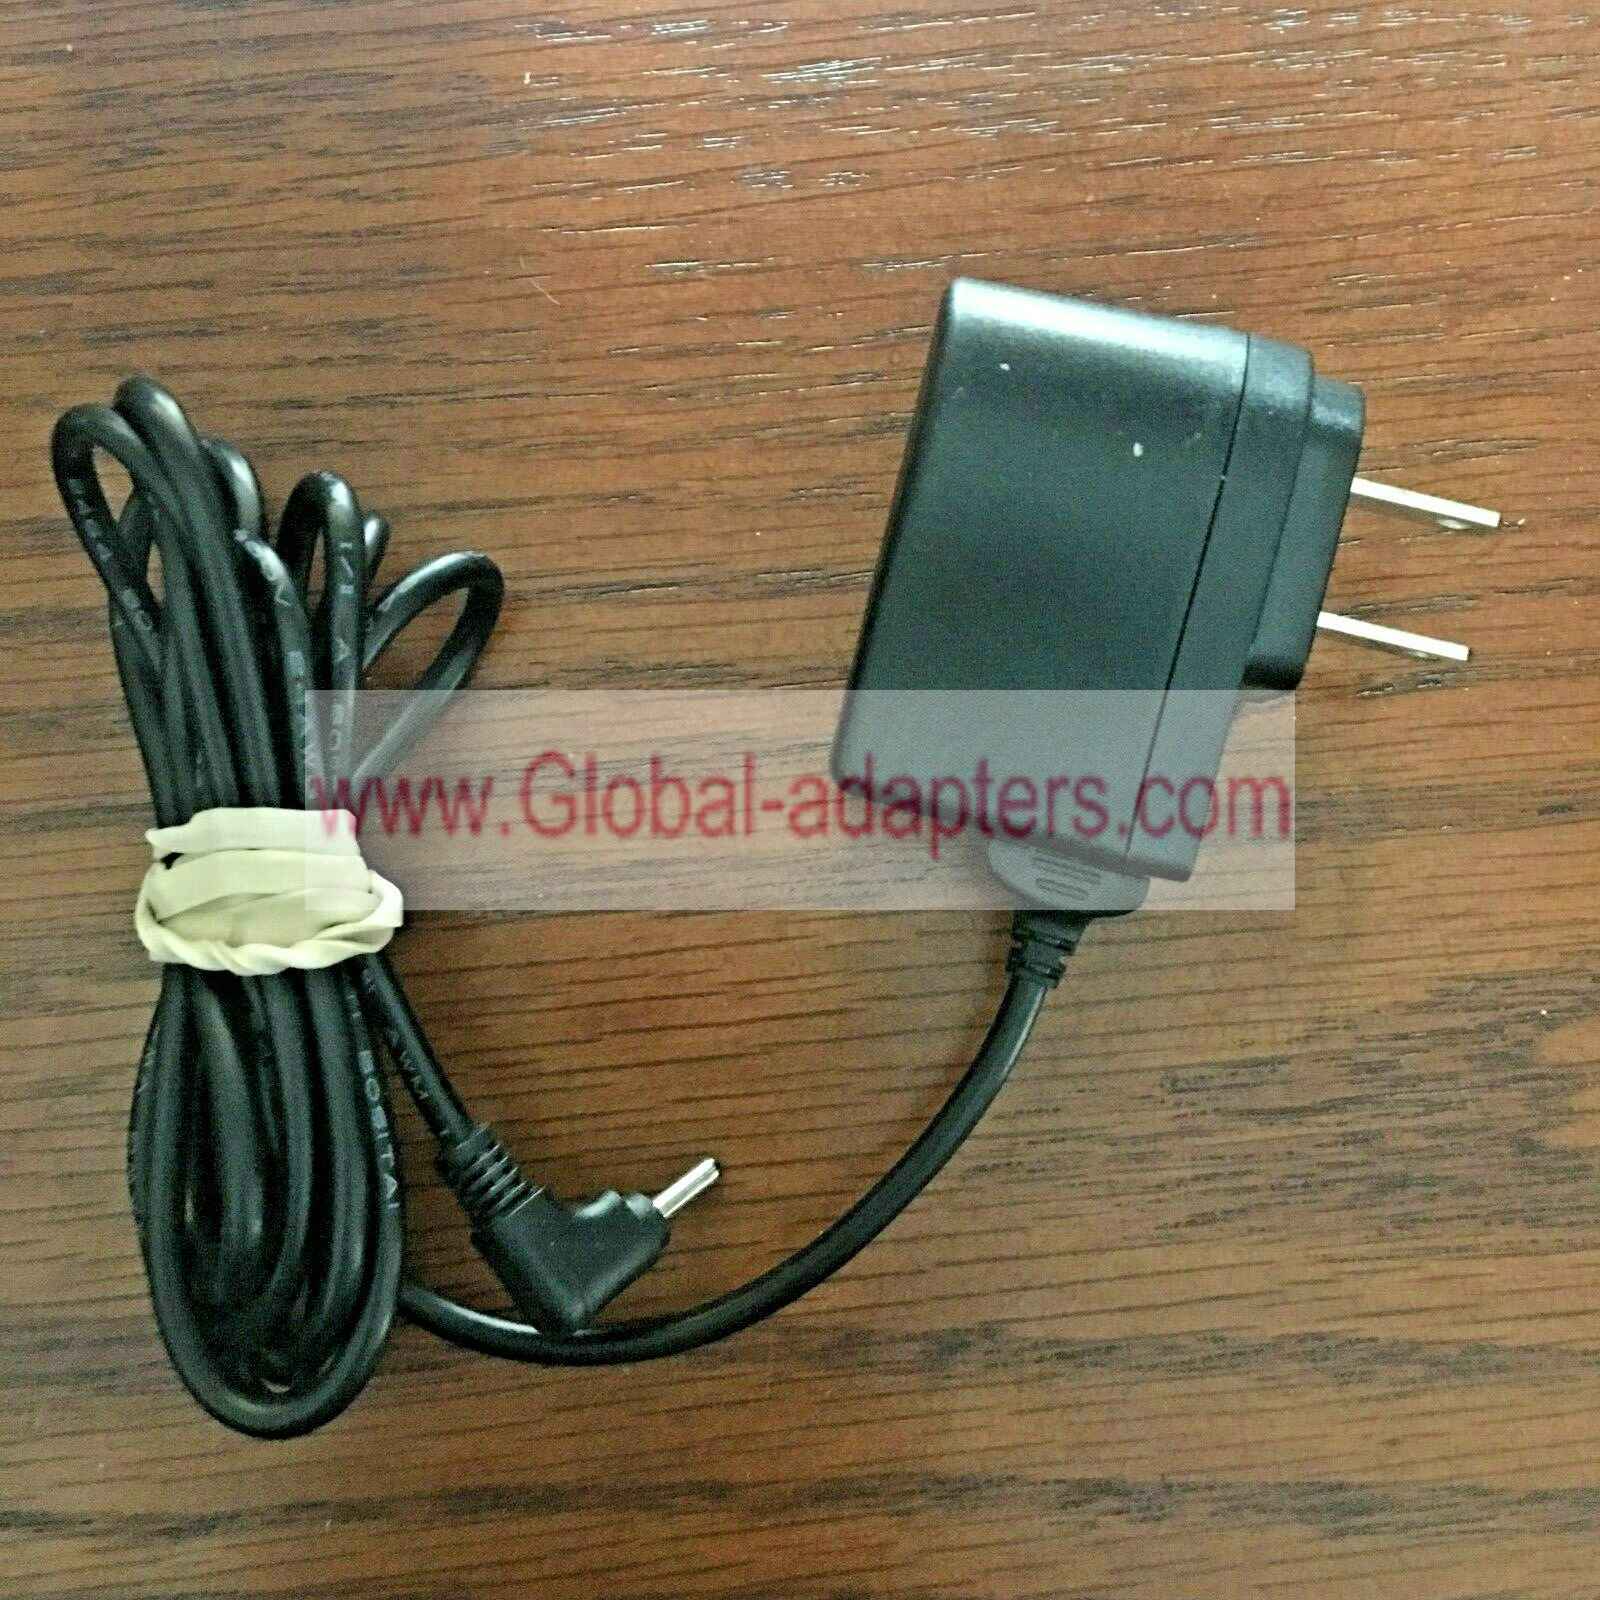 NEW LPL-C005050100ZW Switching Wall Power Supply Micro USB Adapter 100-240V 200mA max 5V 1000mA